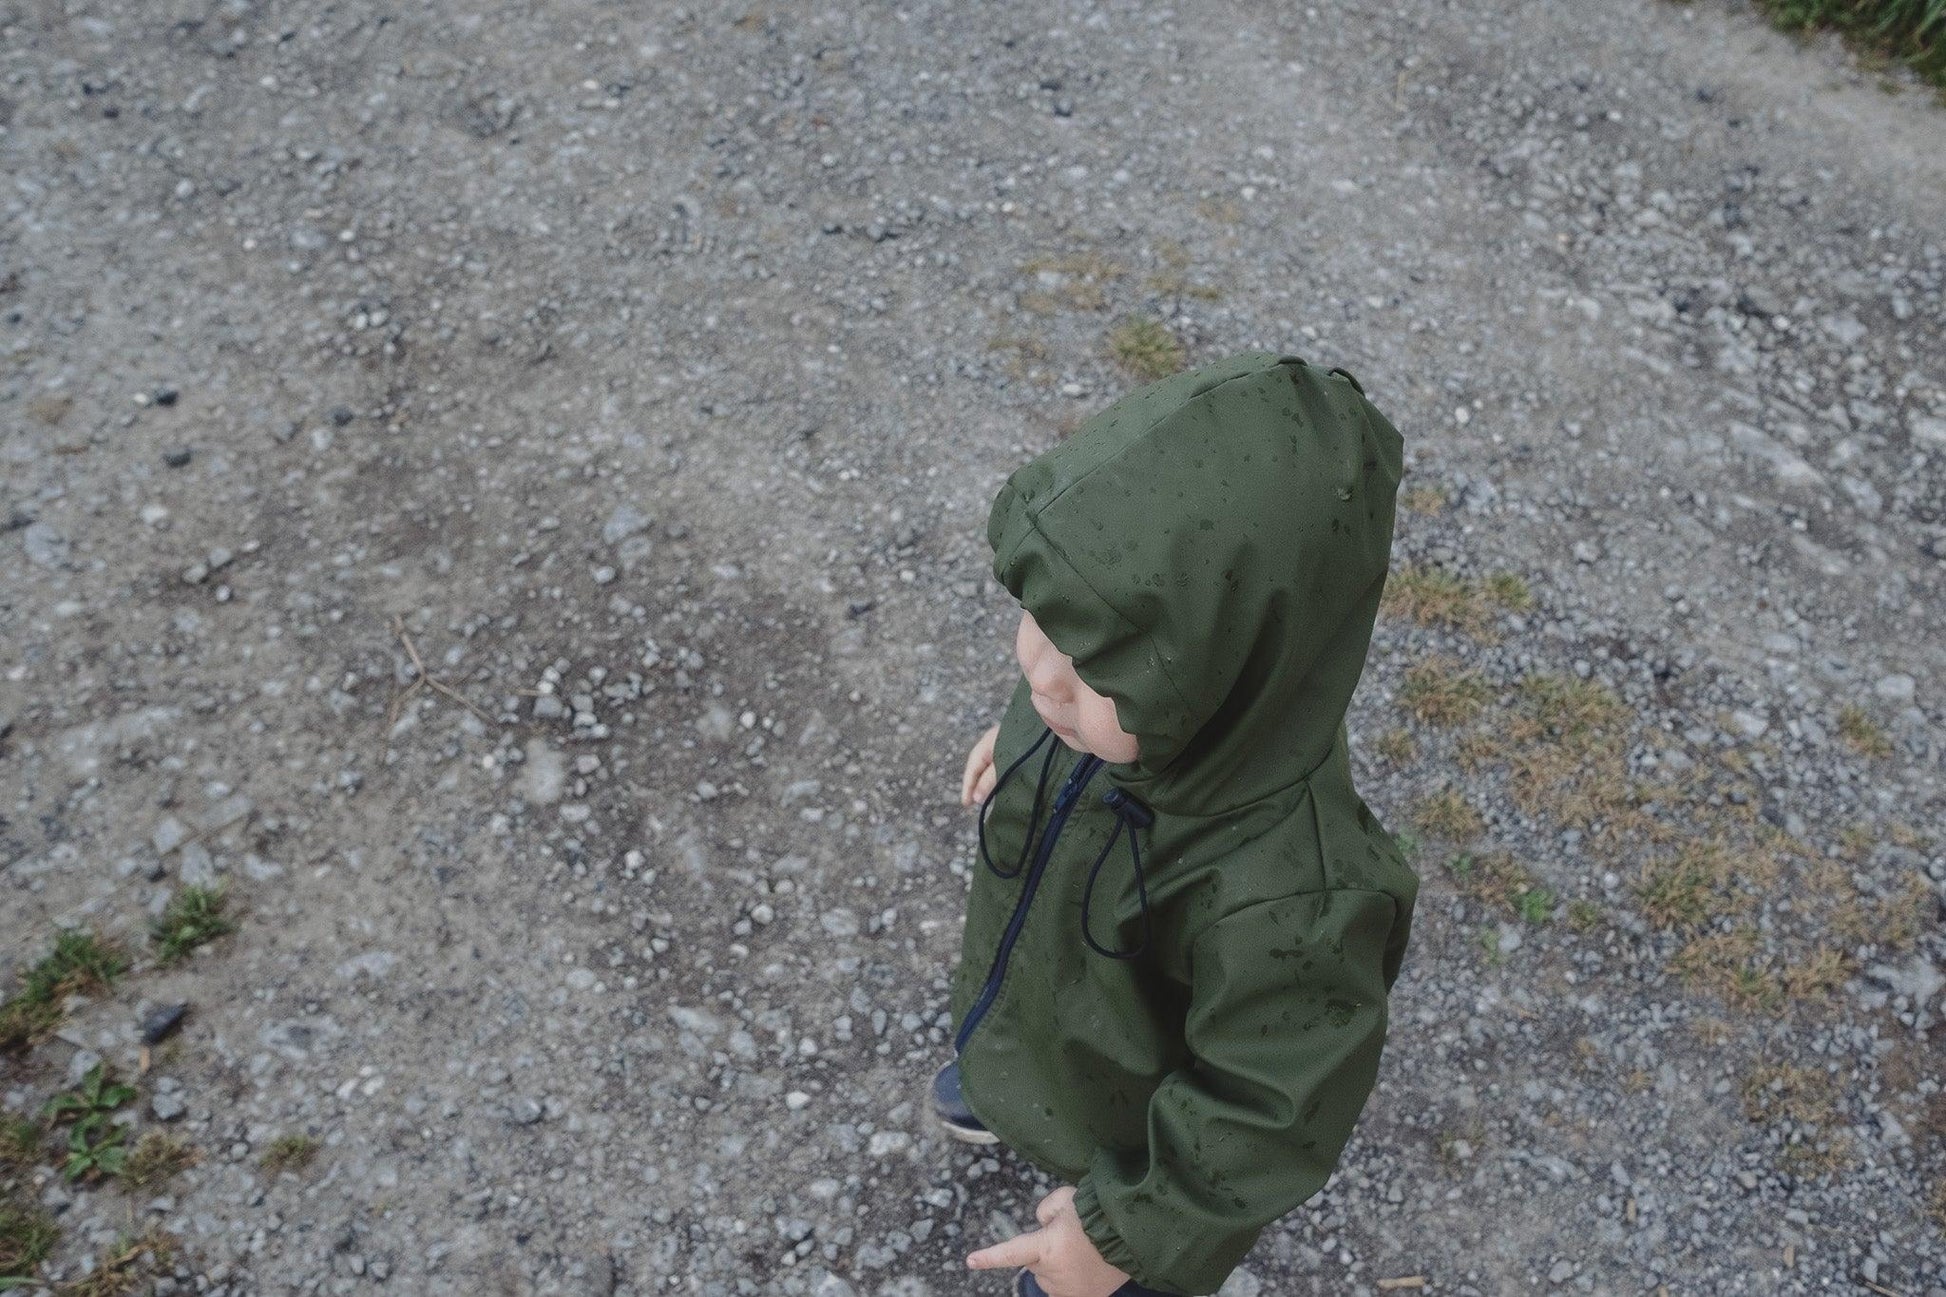 A young child in a Waterproof Baby/Kid Clothing Set - Khaki from MellowConceptStore stands on a gravel path, looking to the side.